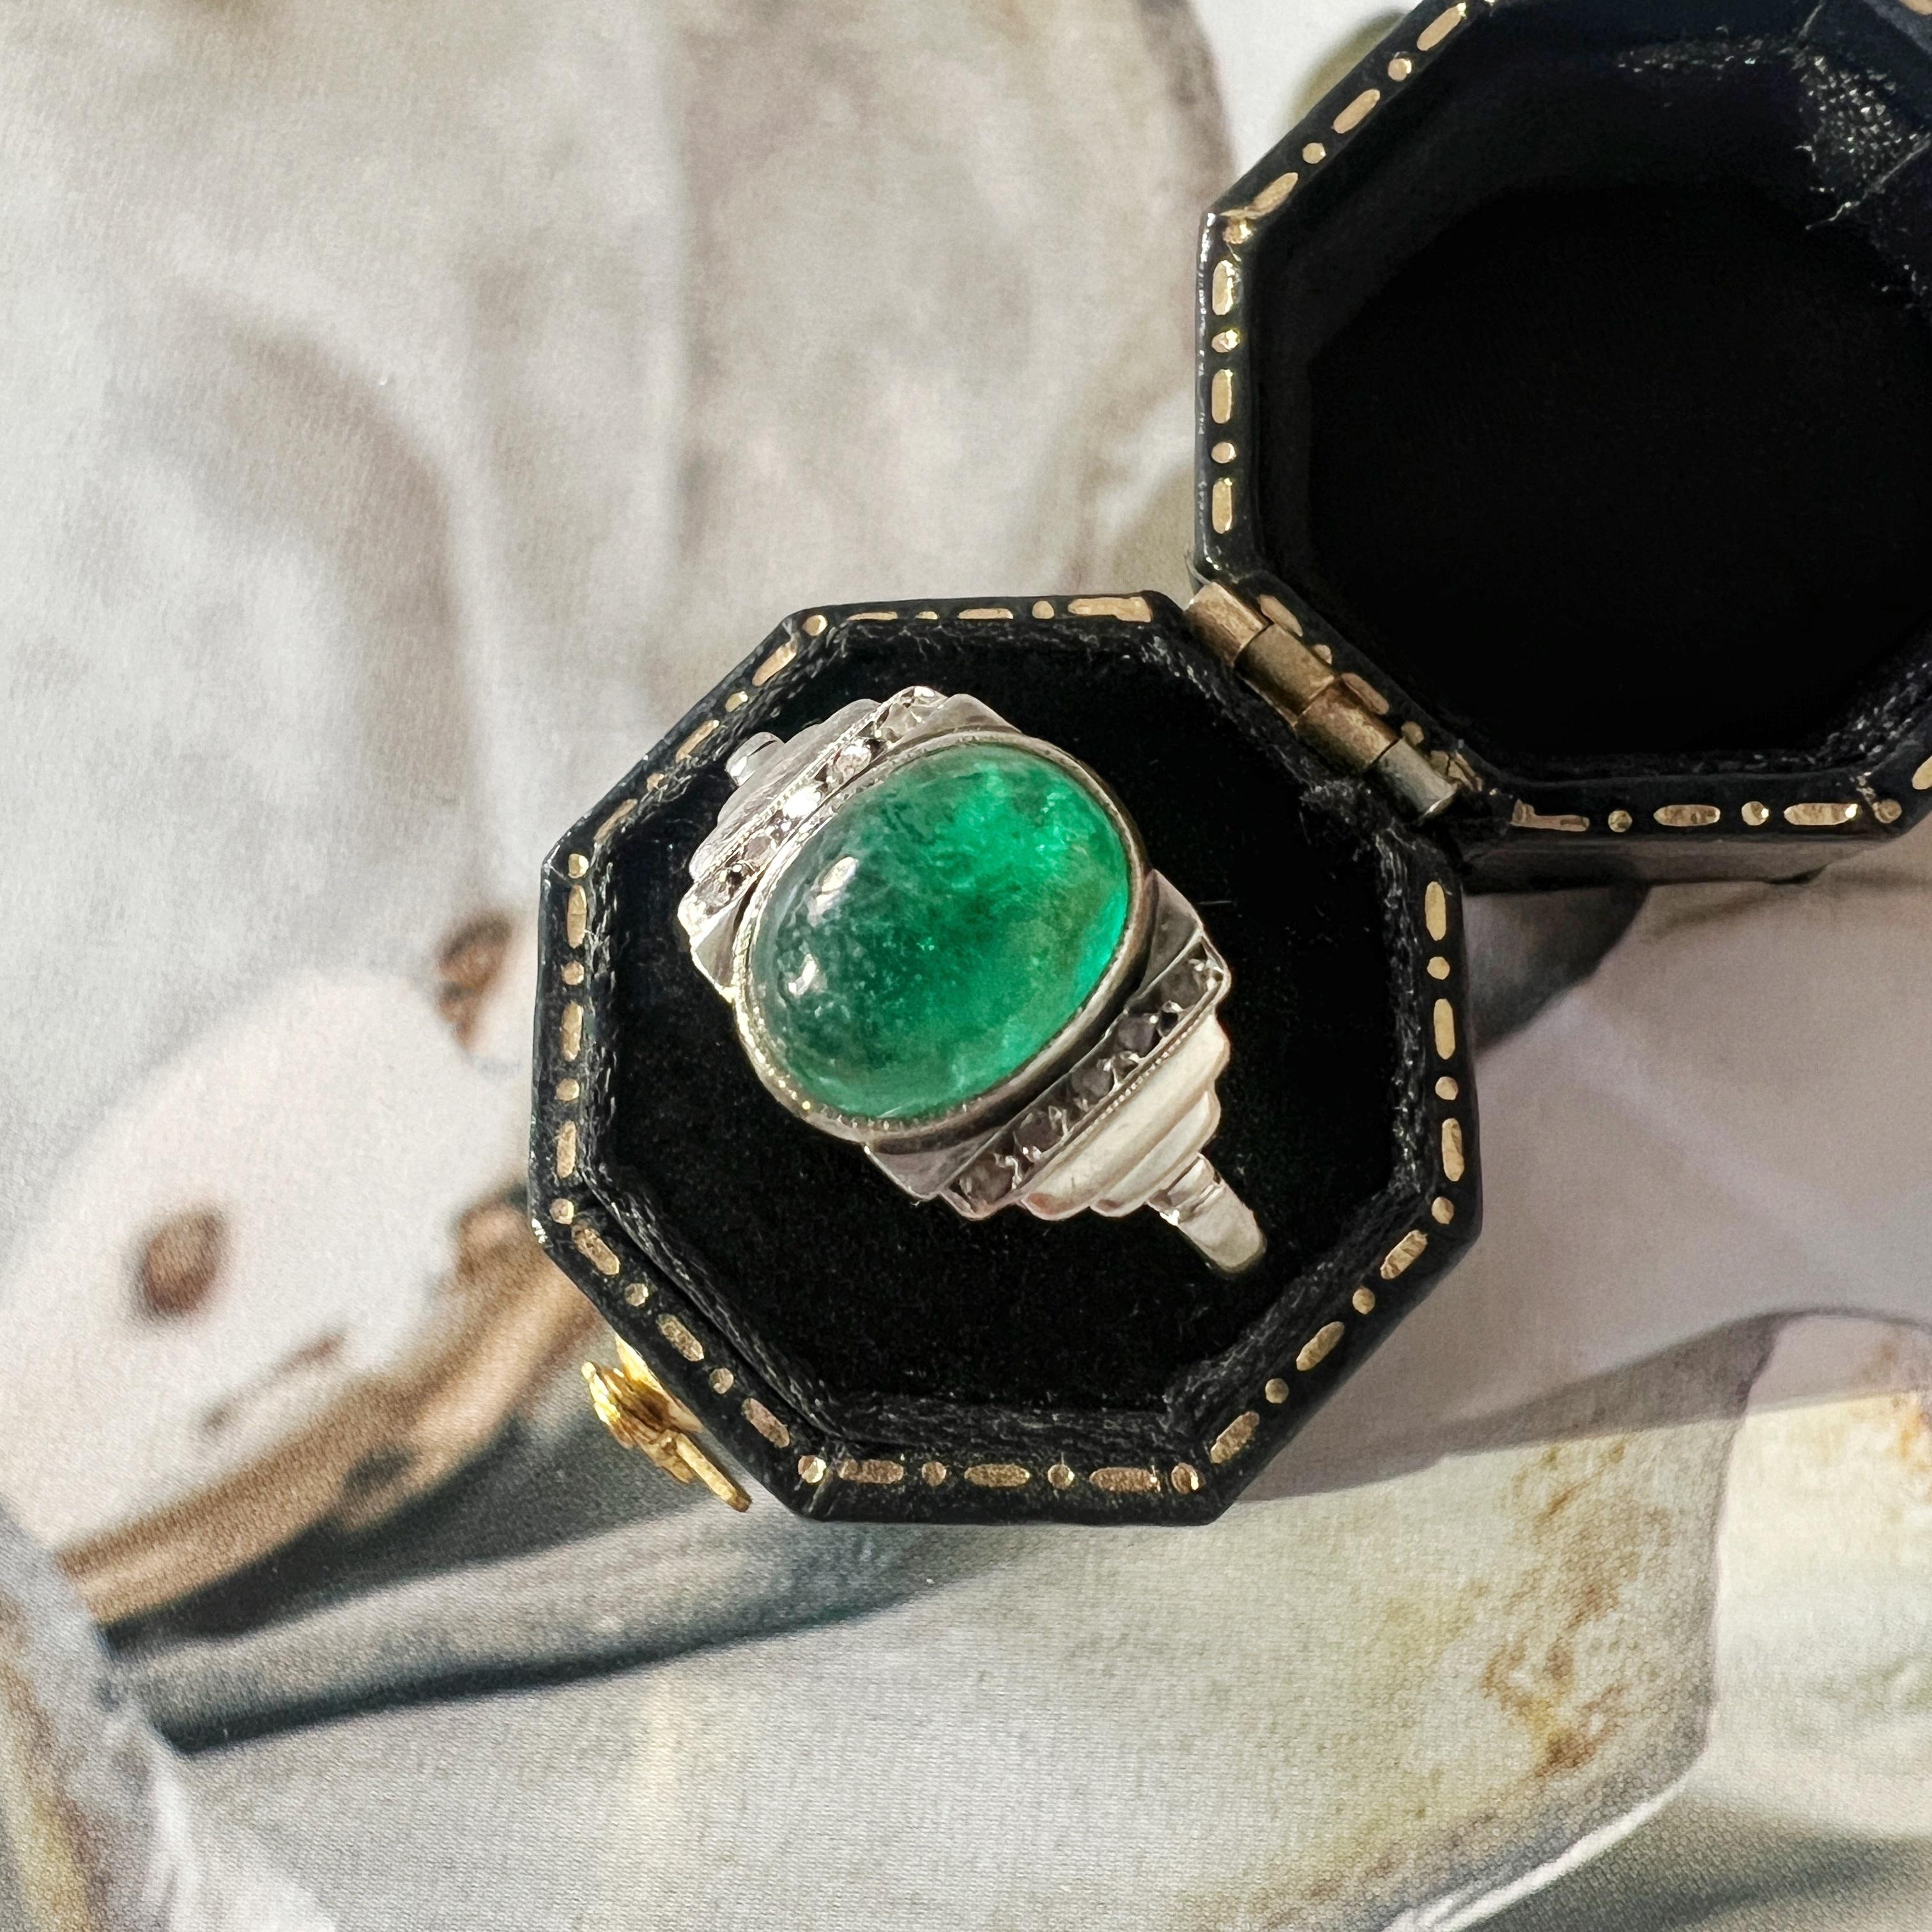 For sale a chic French work, 18K gold art deco ring. At the heart is a luscious emerald cabochon, exhibiting a mesmerizing and vivid green hue. The emerald, with its round dome shape, takes center stage, showcasing the allure of its natural